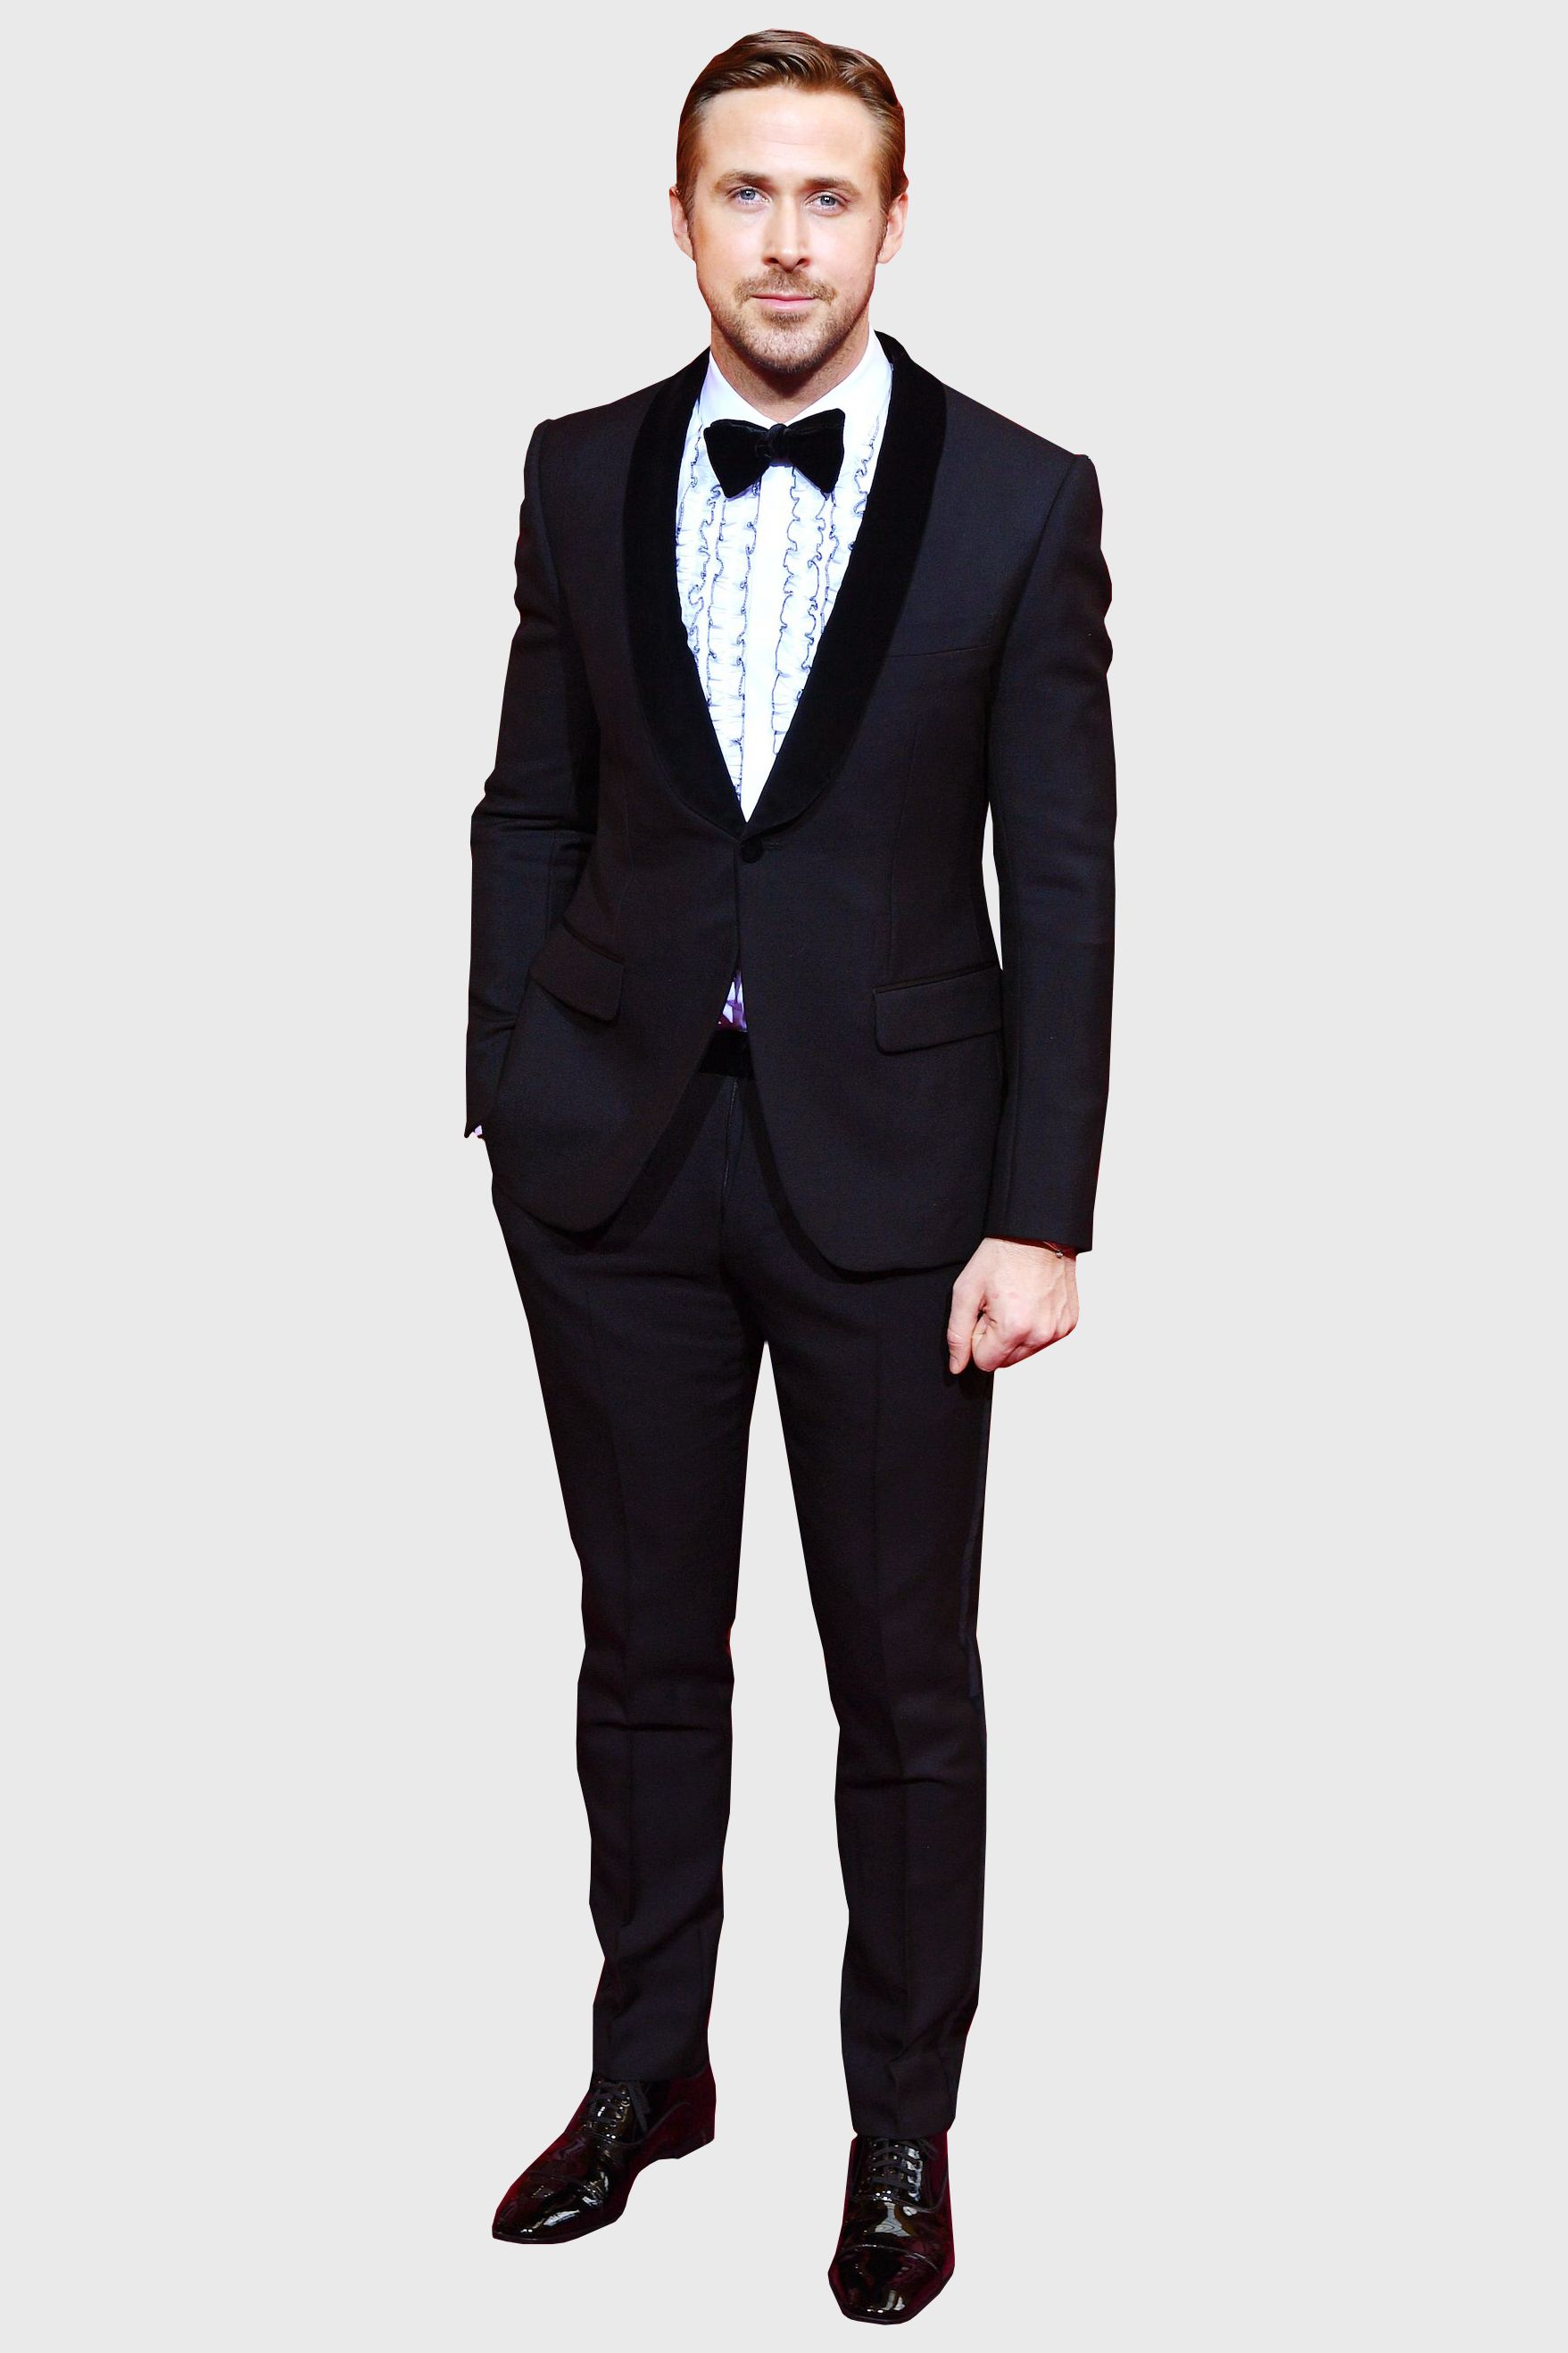 How to Wear a Blue Tuxedo  5 Simple Rules  Black Lapel